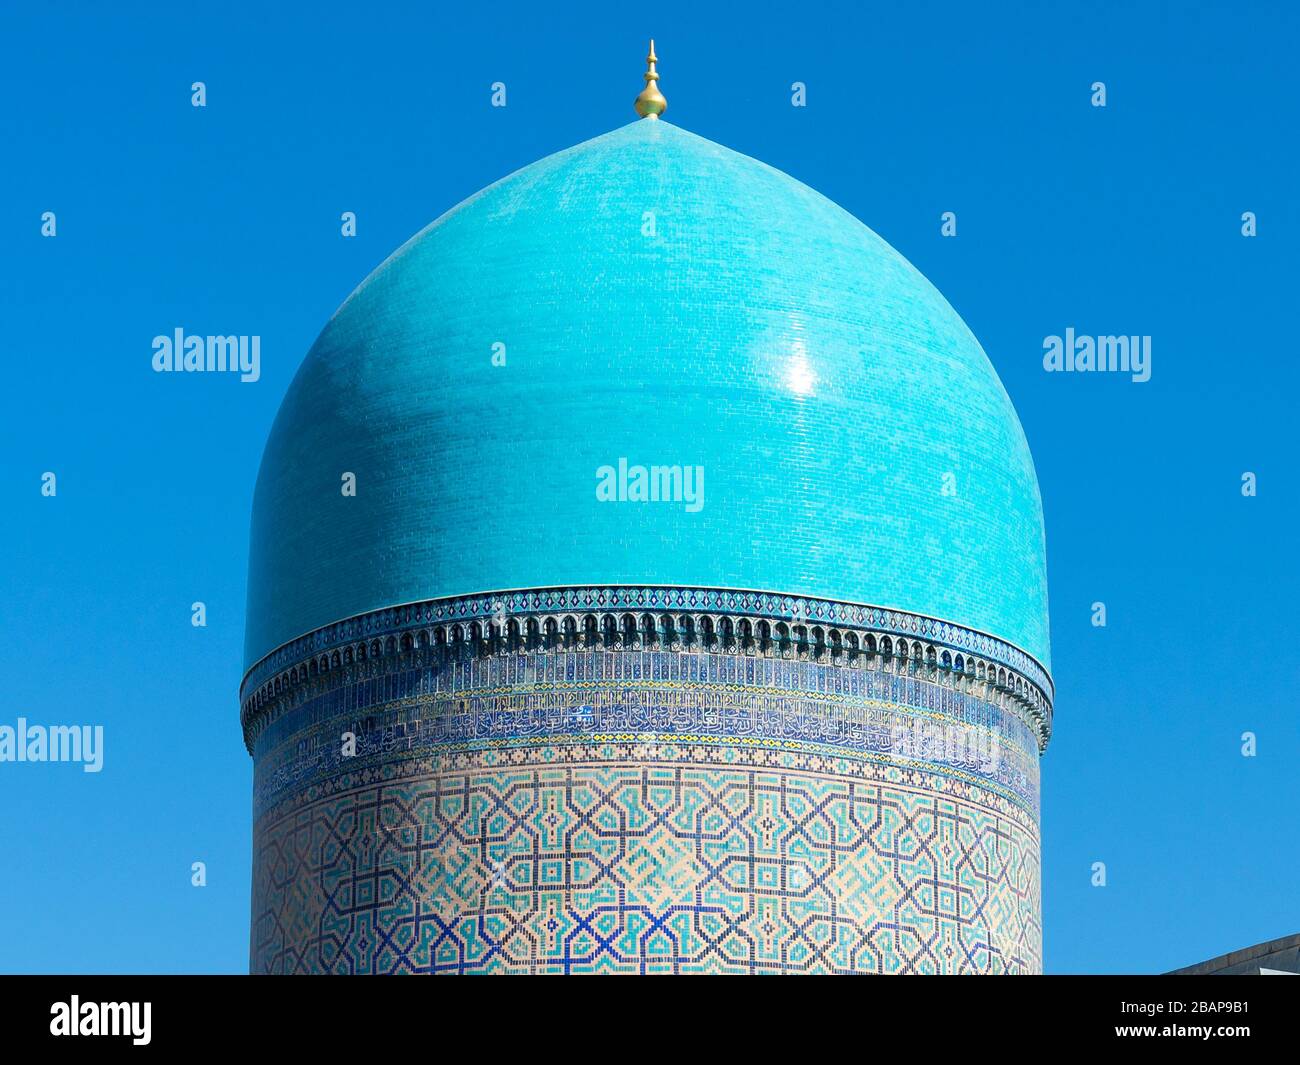 Big dome in turquoise color with detailed ornaments of blue ceramic tiles at Tilya Kori Madrasah and Mosque. Cupola at Registan Samarkand, Uzbekistan. Stock Photo